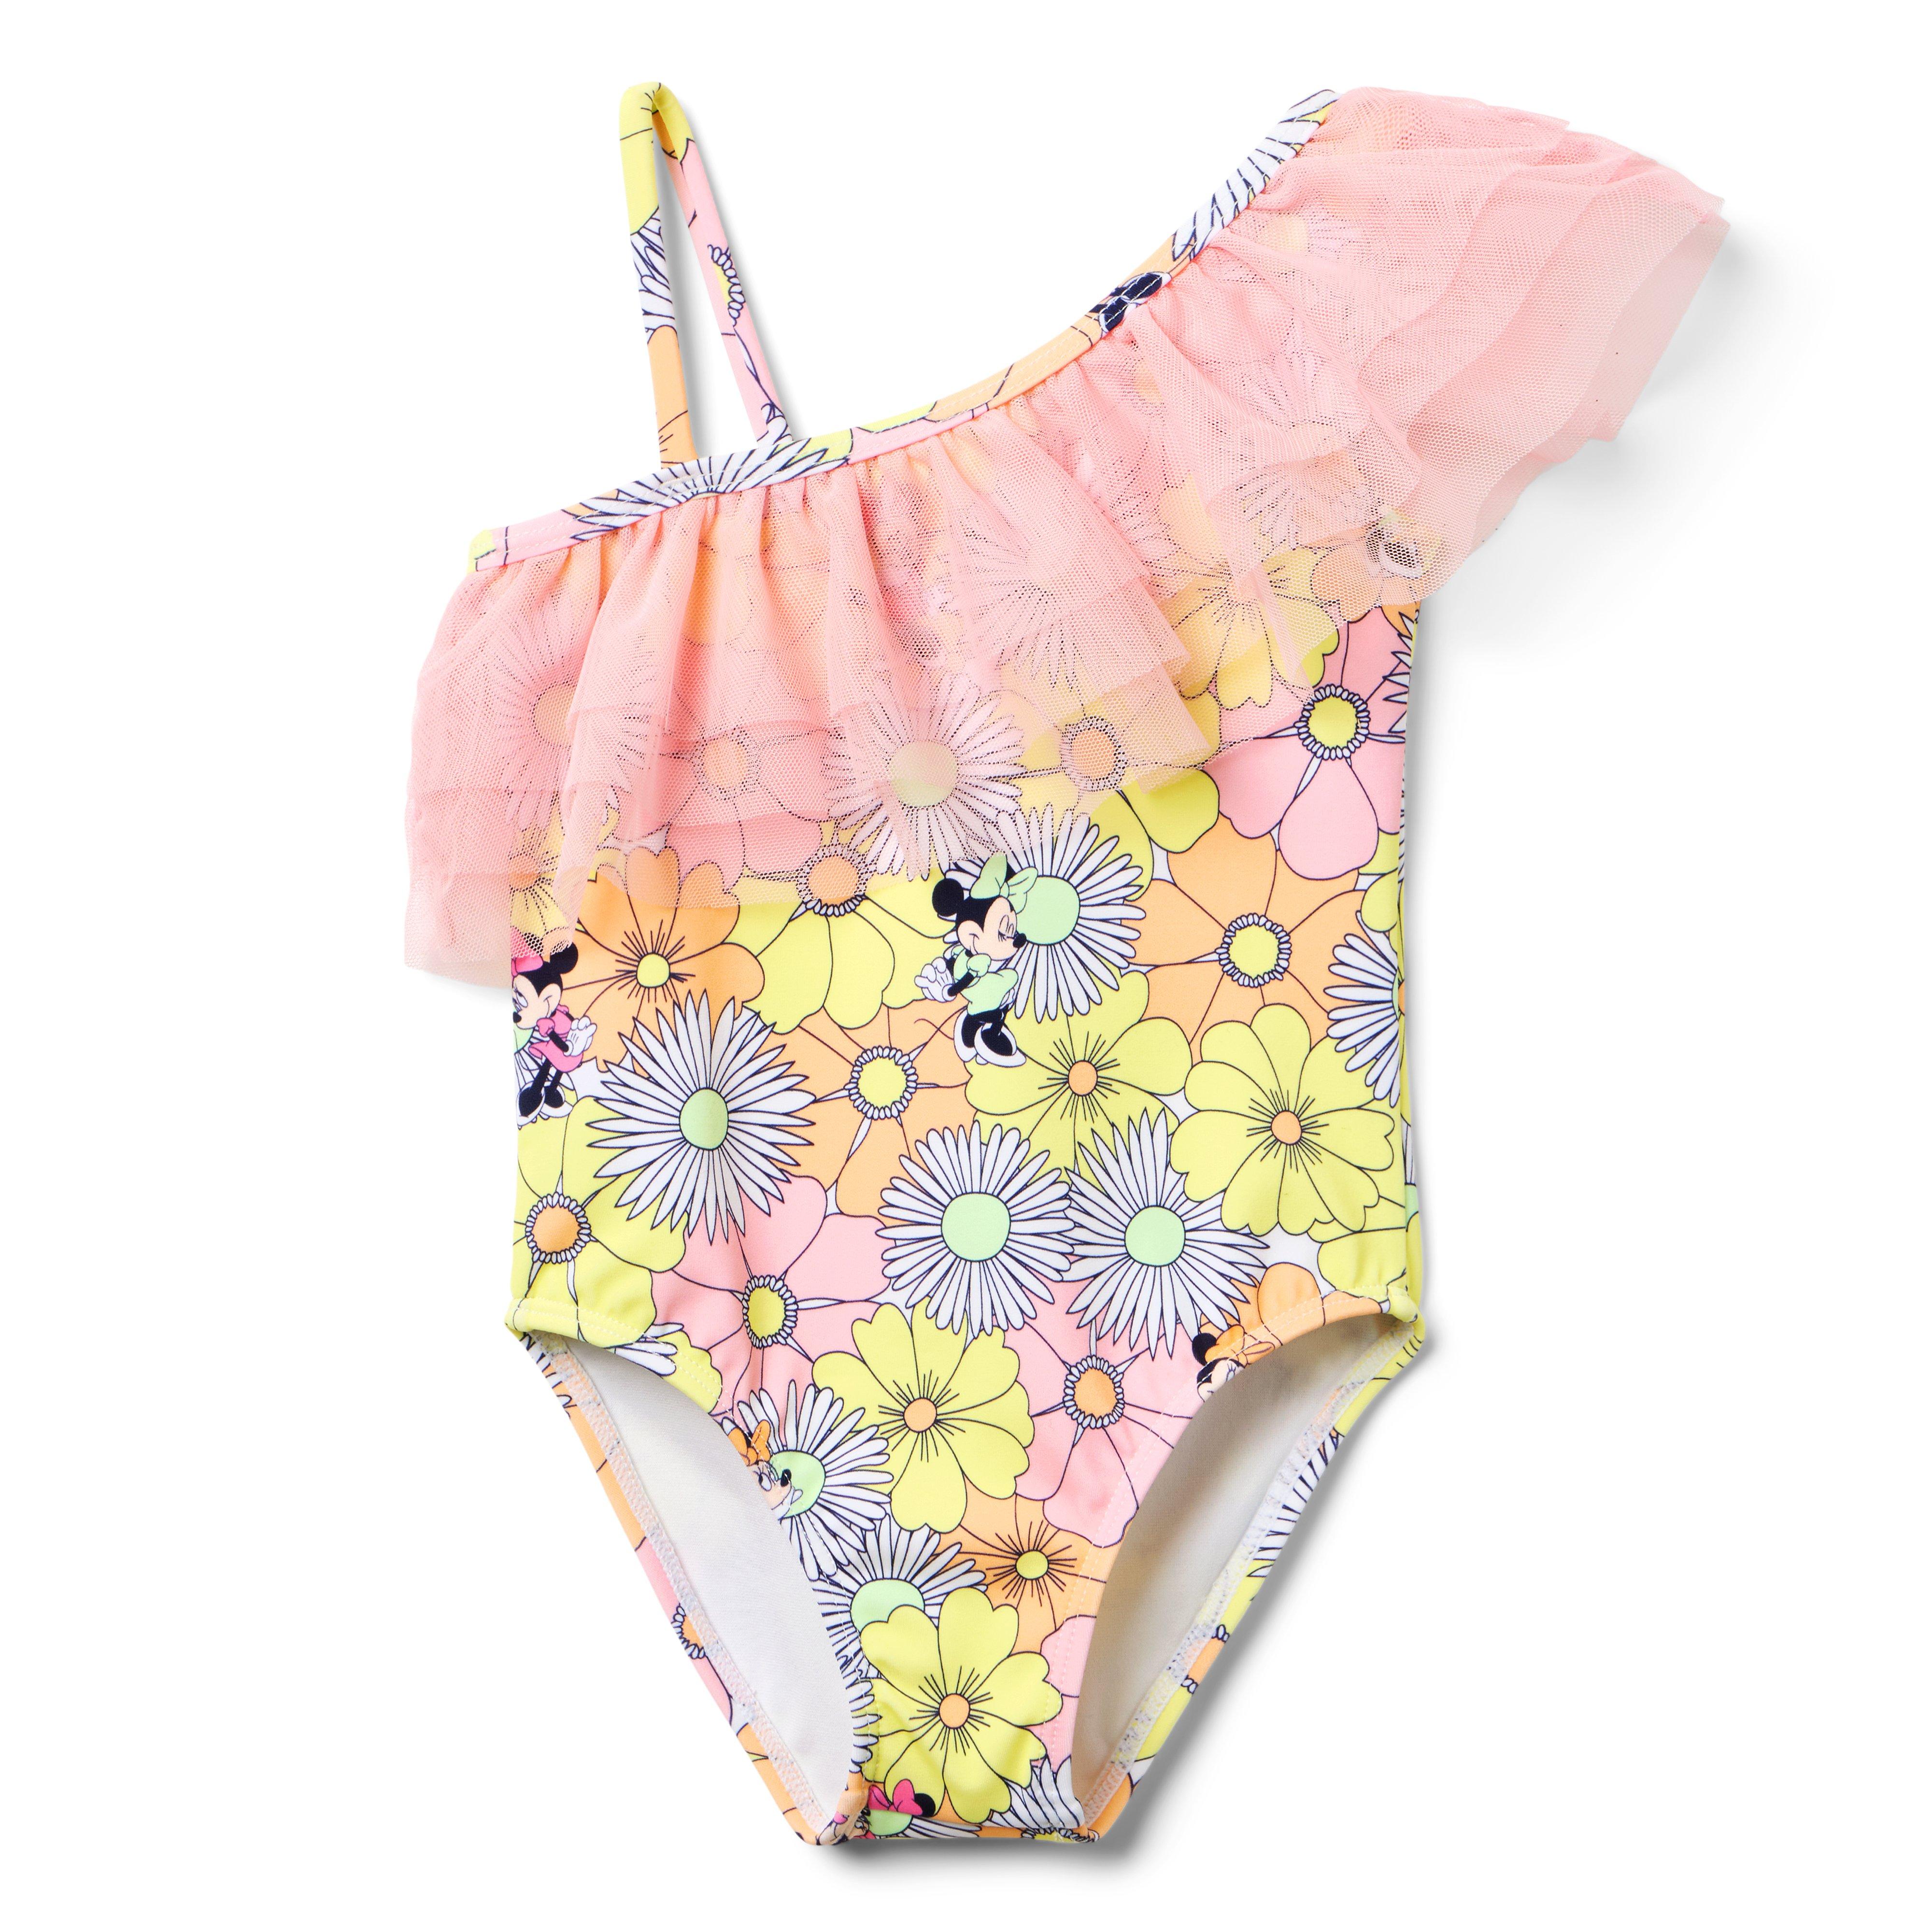 Disney Minnie Mouse Recycled Floral Swimsuit